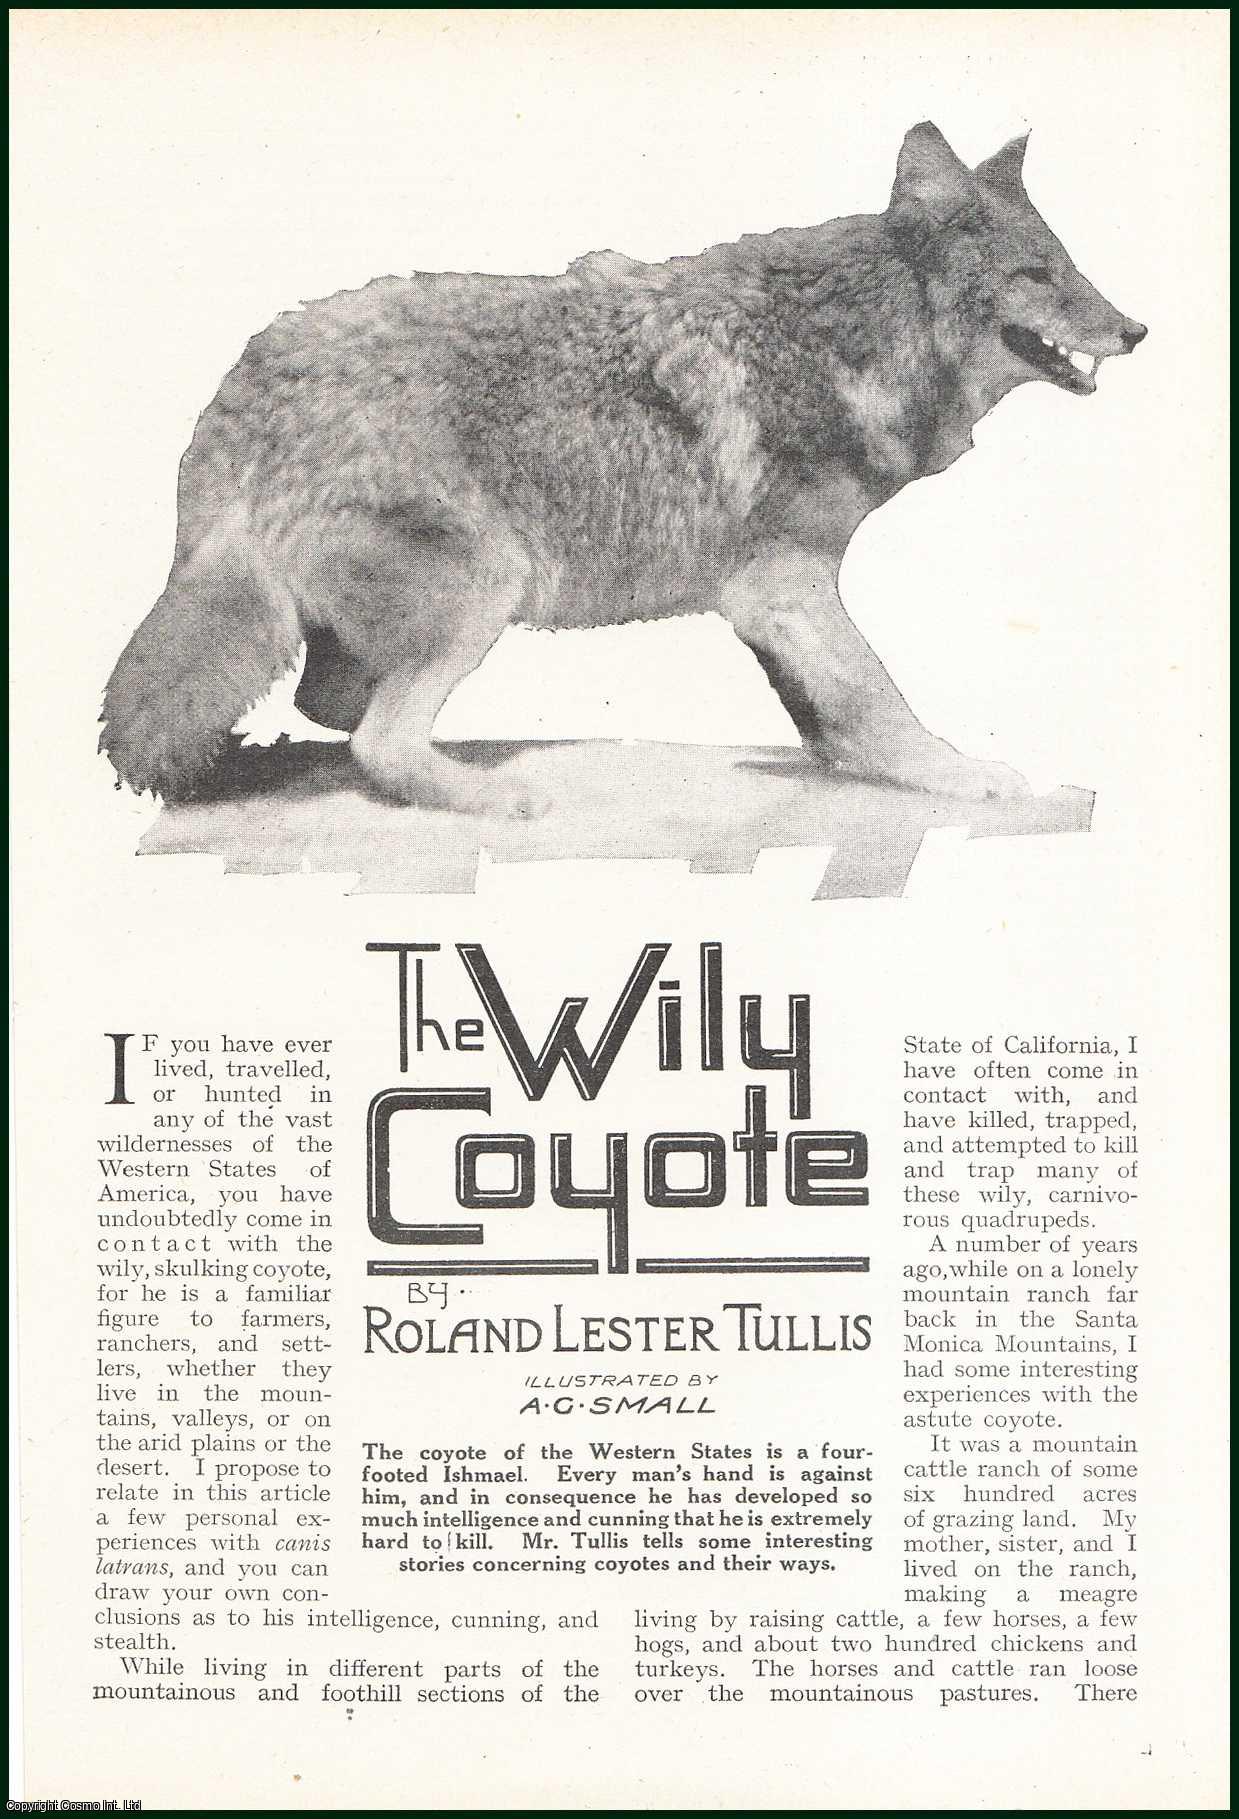 Roland Lester Tullis, illustrated by A.G. Small. - The Wily Coyote : the coyote of the Western States is a four-footed Ishmael. This is an uncommon original article from the Wide World Magazine, 1921.